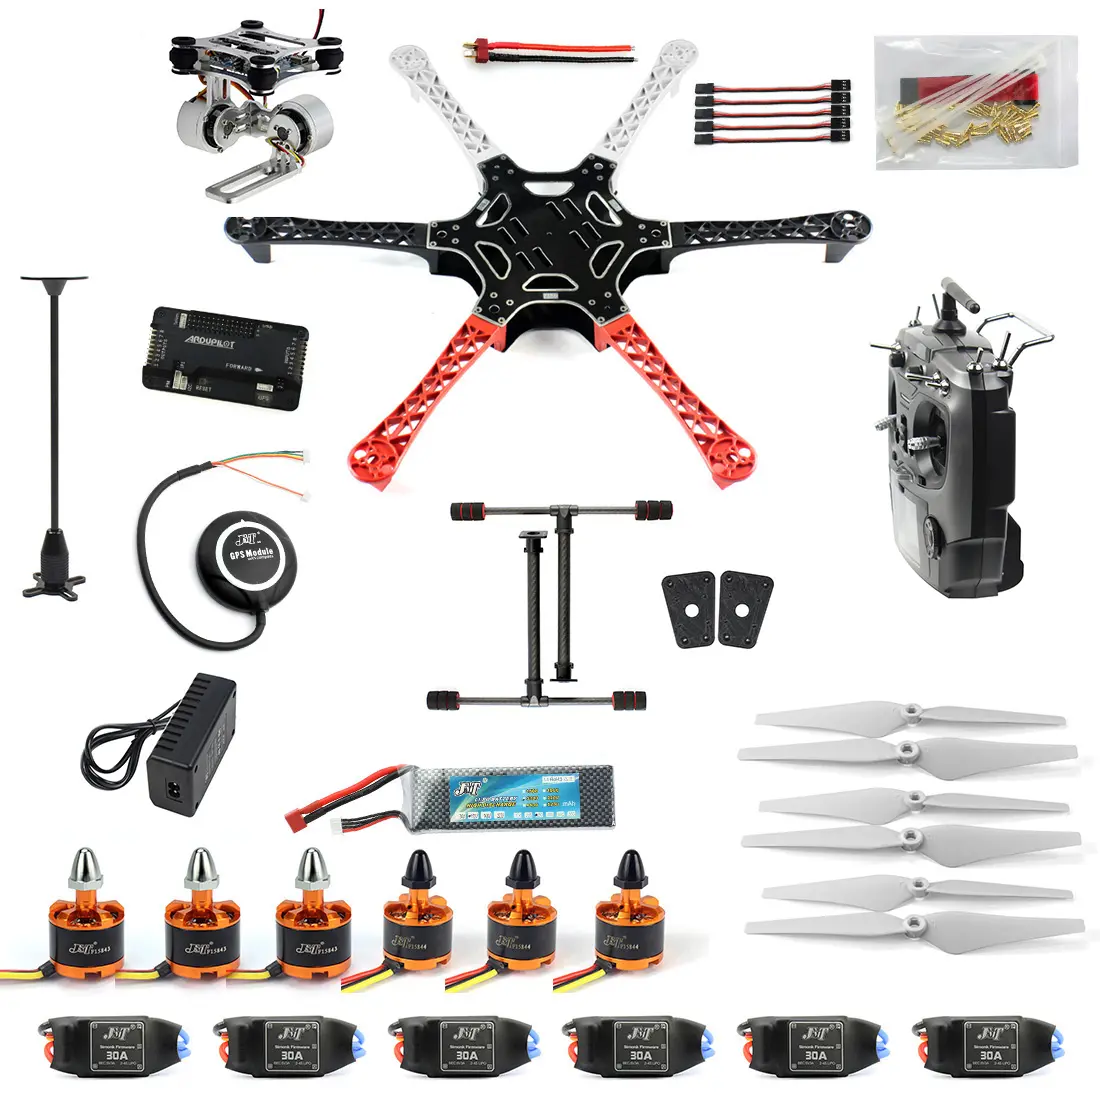 F05114-AS DIY RC Drone Assembled F550 6-Alxe RTF Full Kit with APM 2.8 Flight Controller GPS Compass &amp; Gimbal